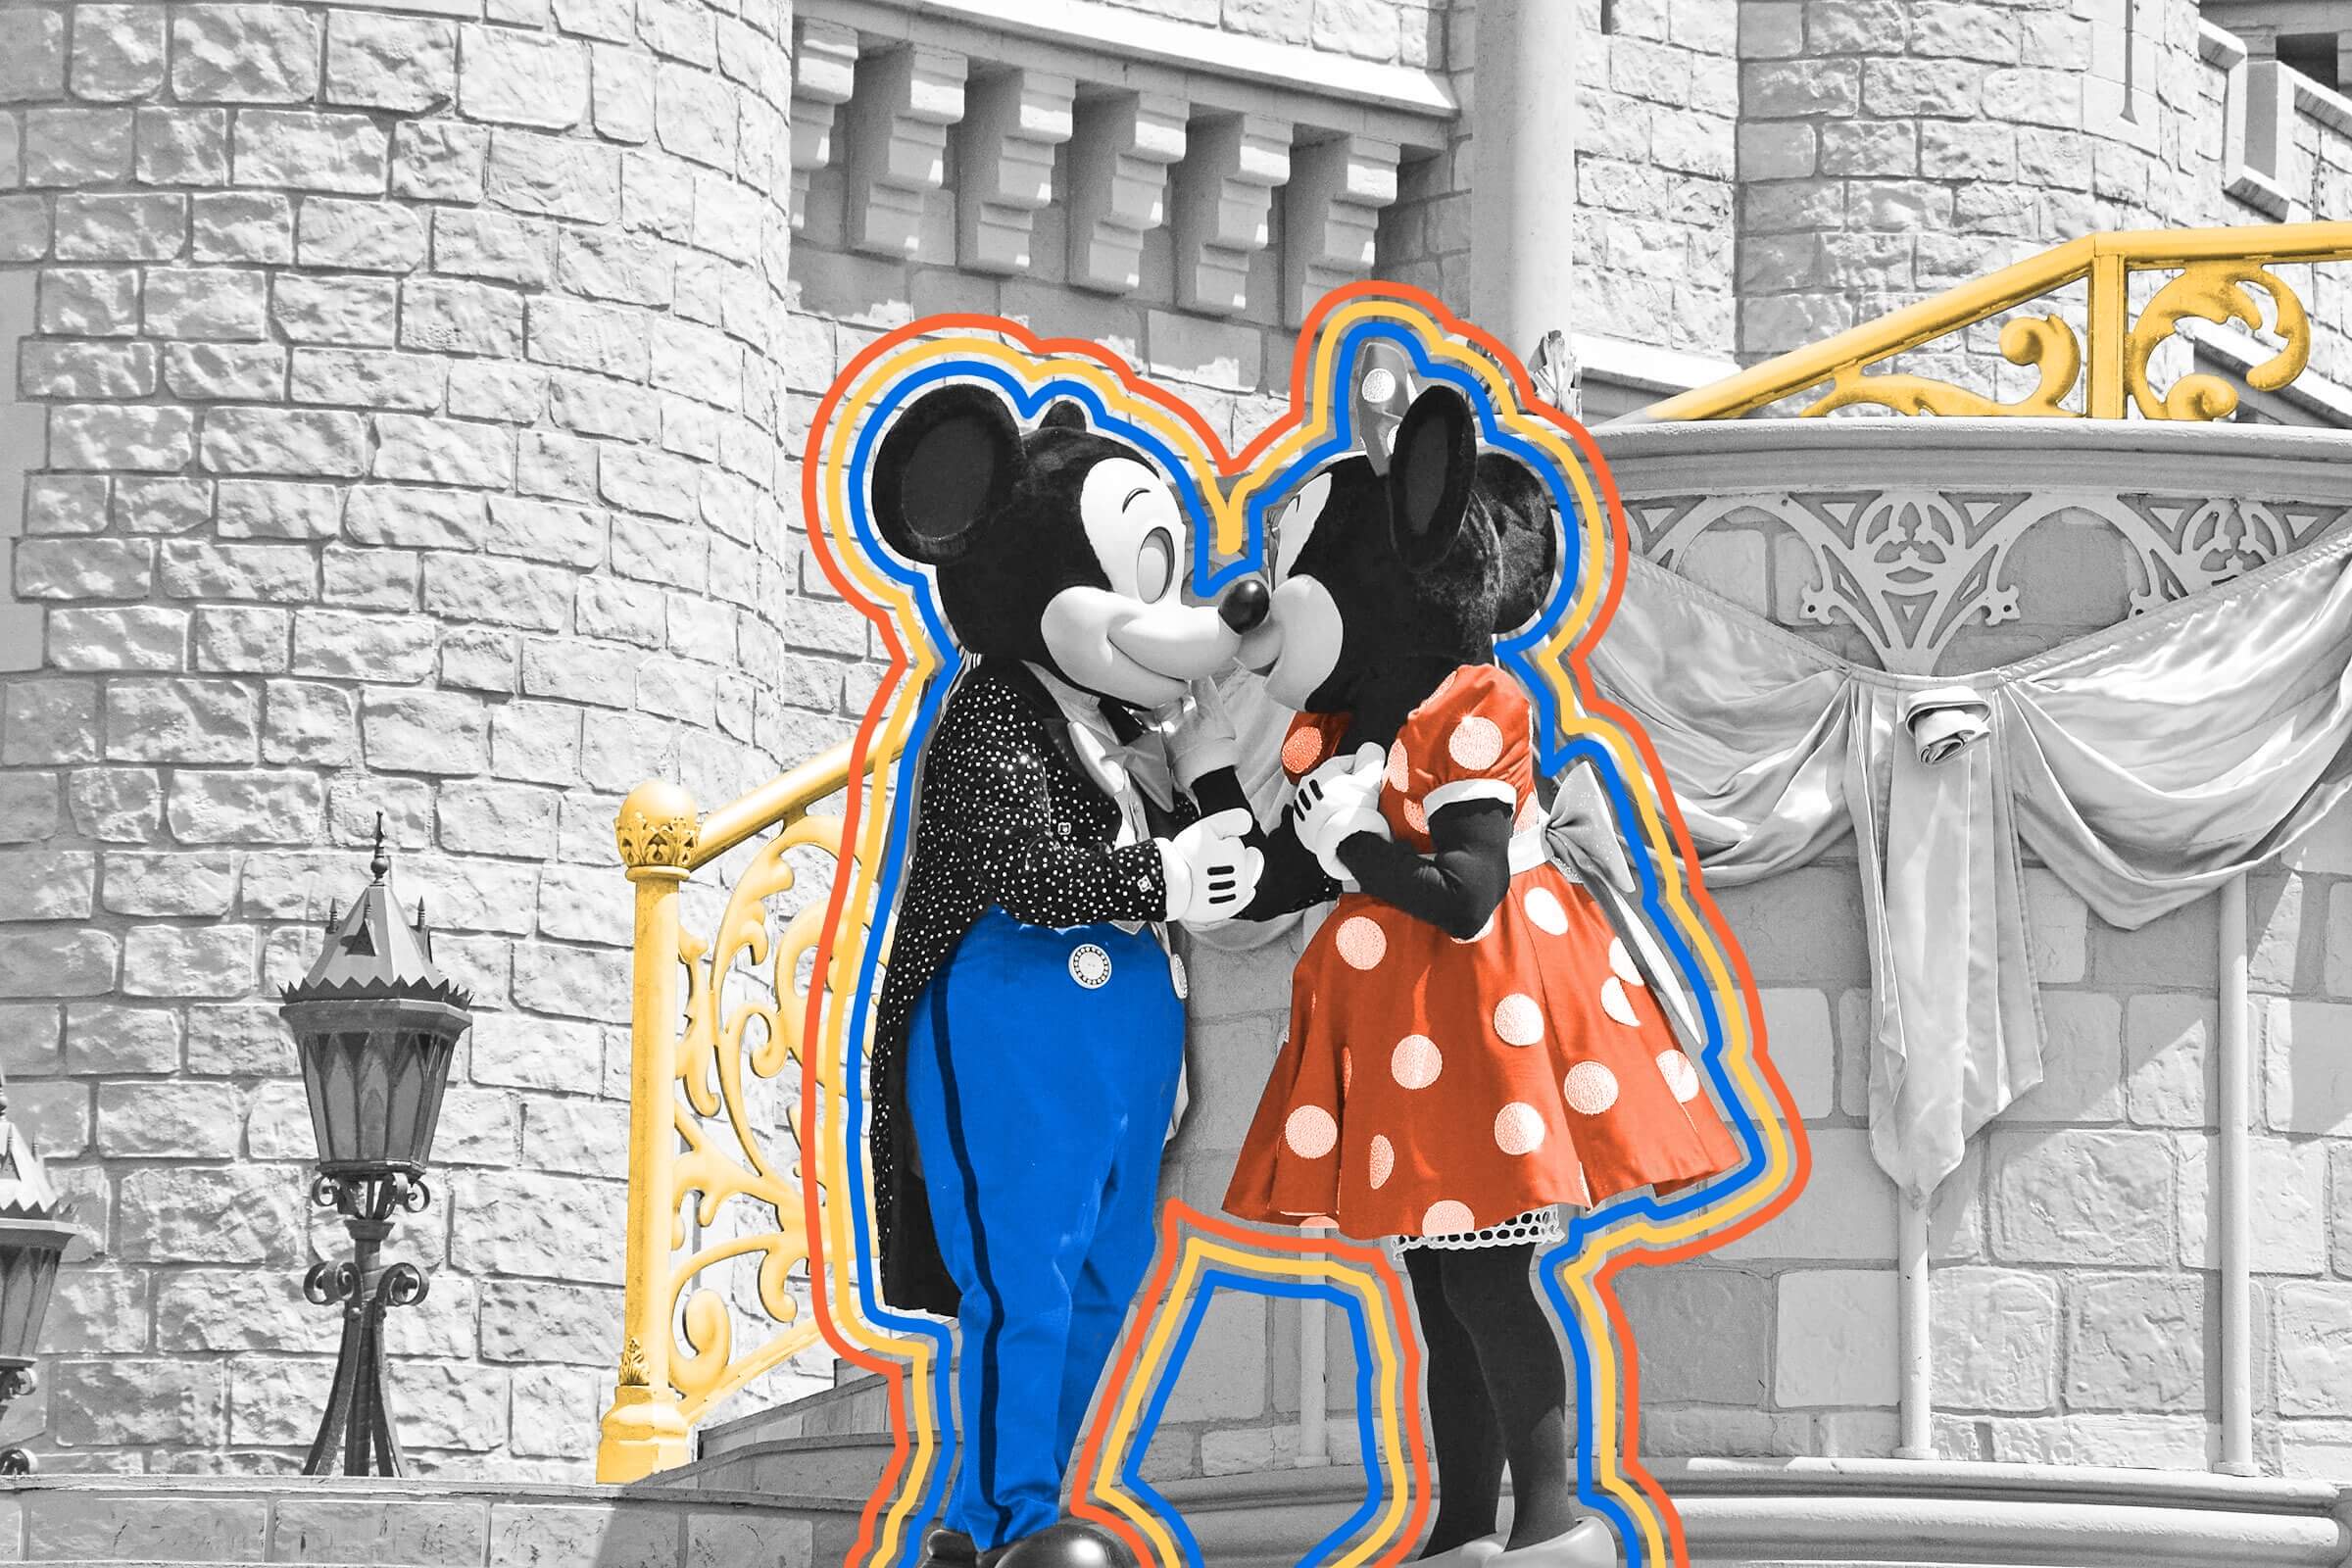 The voice actors behind Mickey and Minnie Mouse got married in real life.